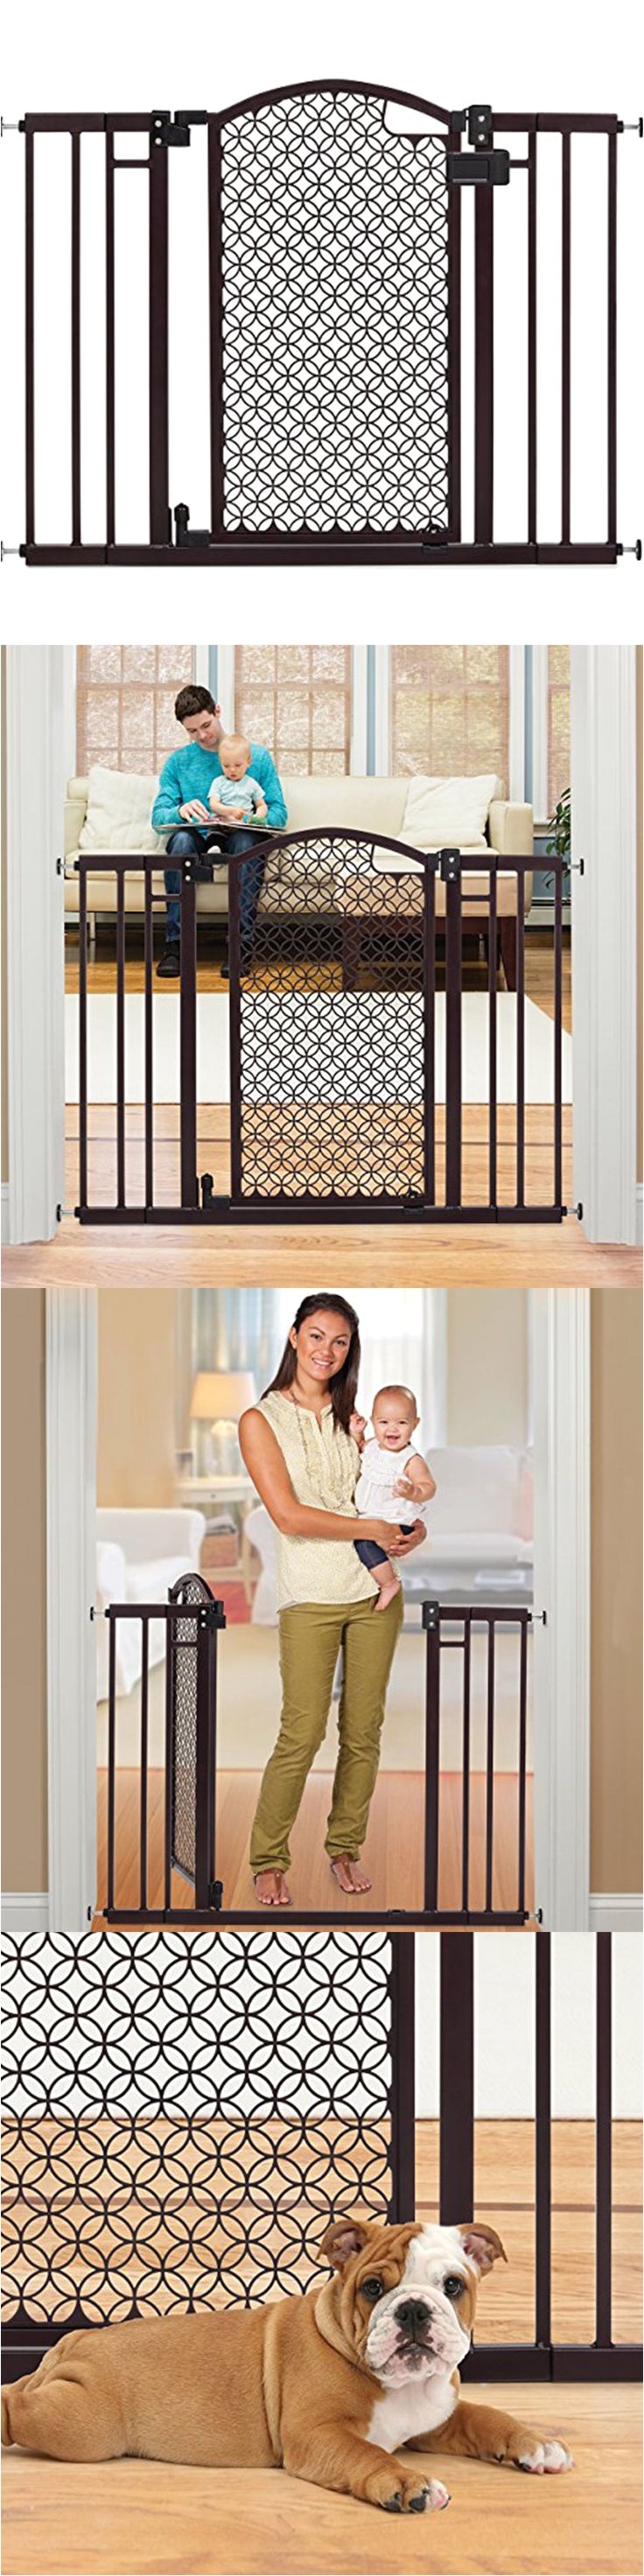 safety gates 117029 safety gate walk through extra wide baby child pet easy close fence